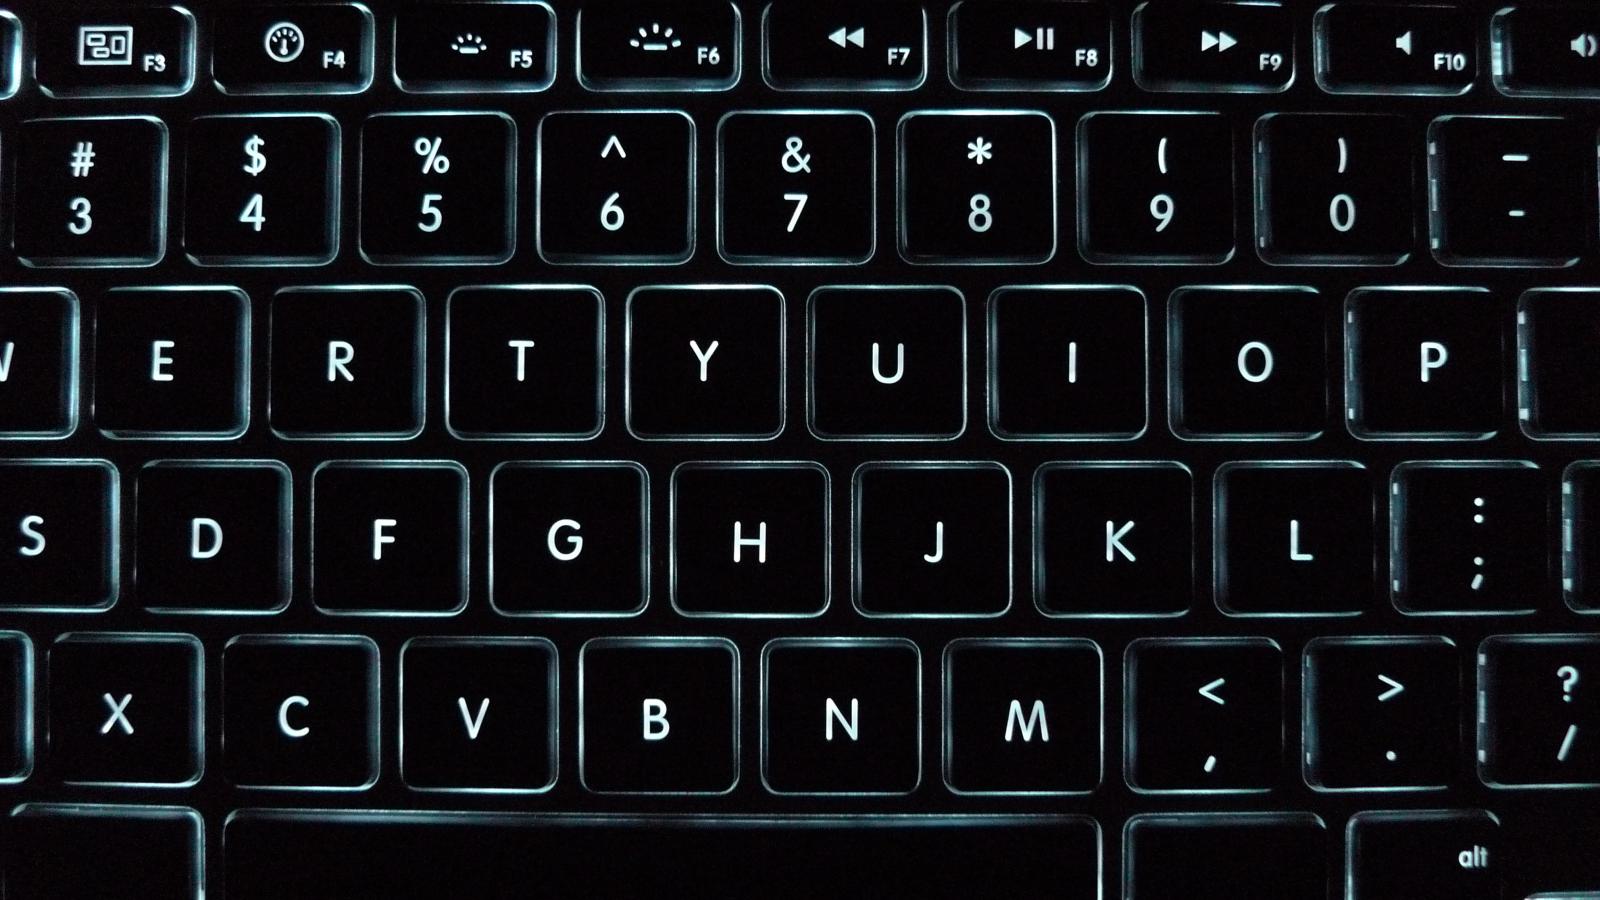 Google is considering doing away with space bars